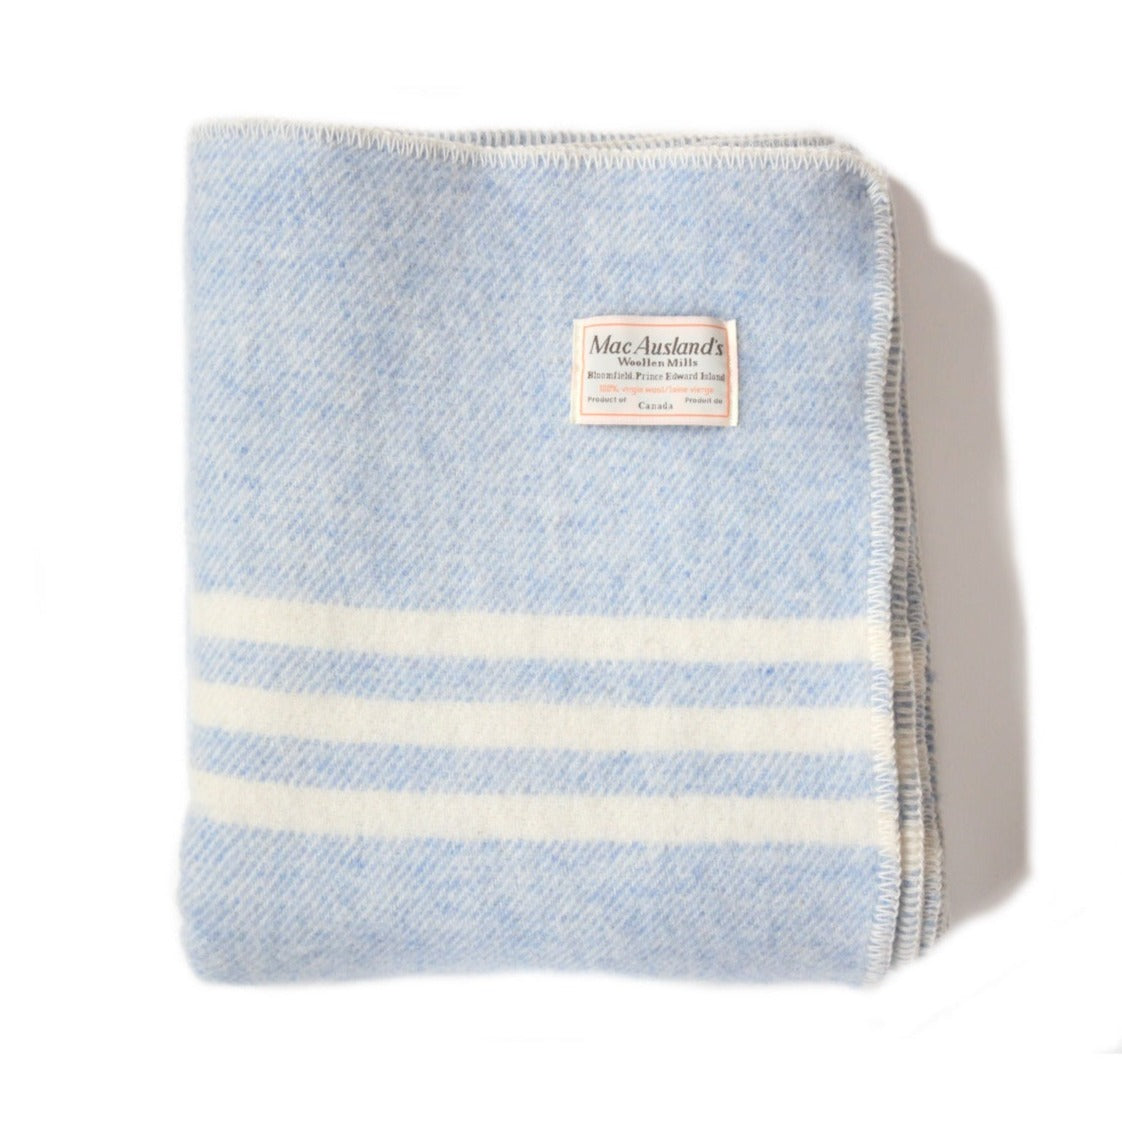 Light blue Canadian virgin wool MacAusland blanket with three white stripes, made in Canada by MacAusland's Woollen Mills in PEI.